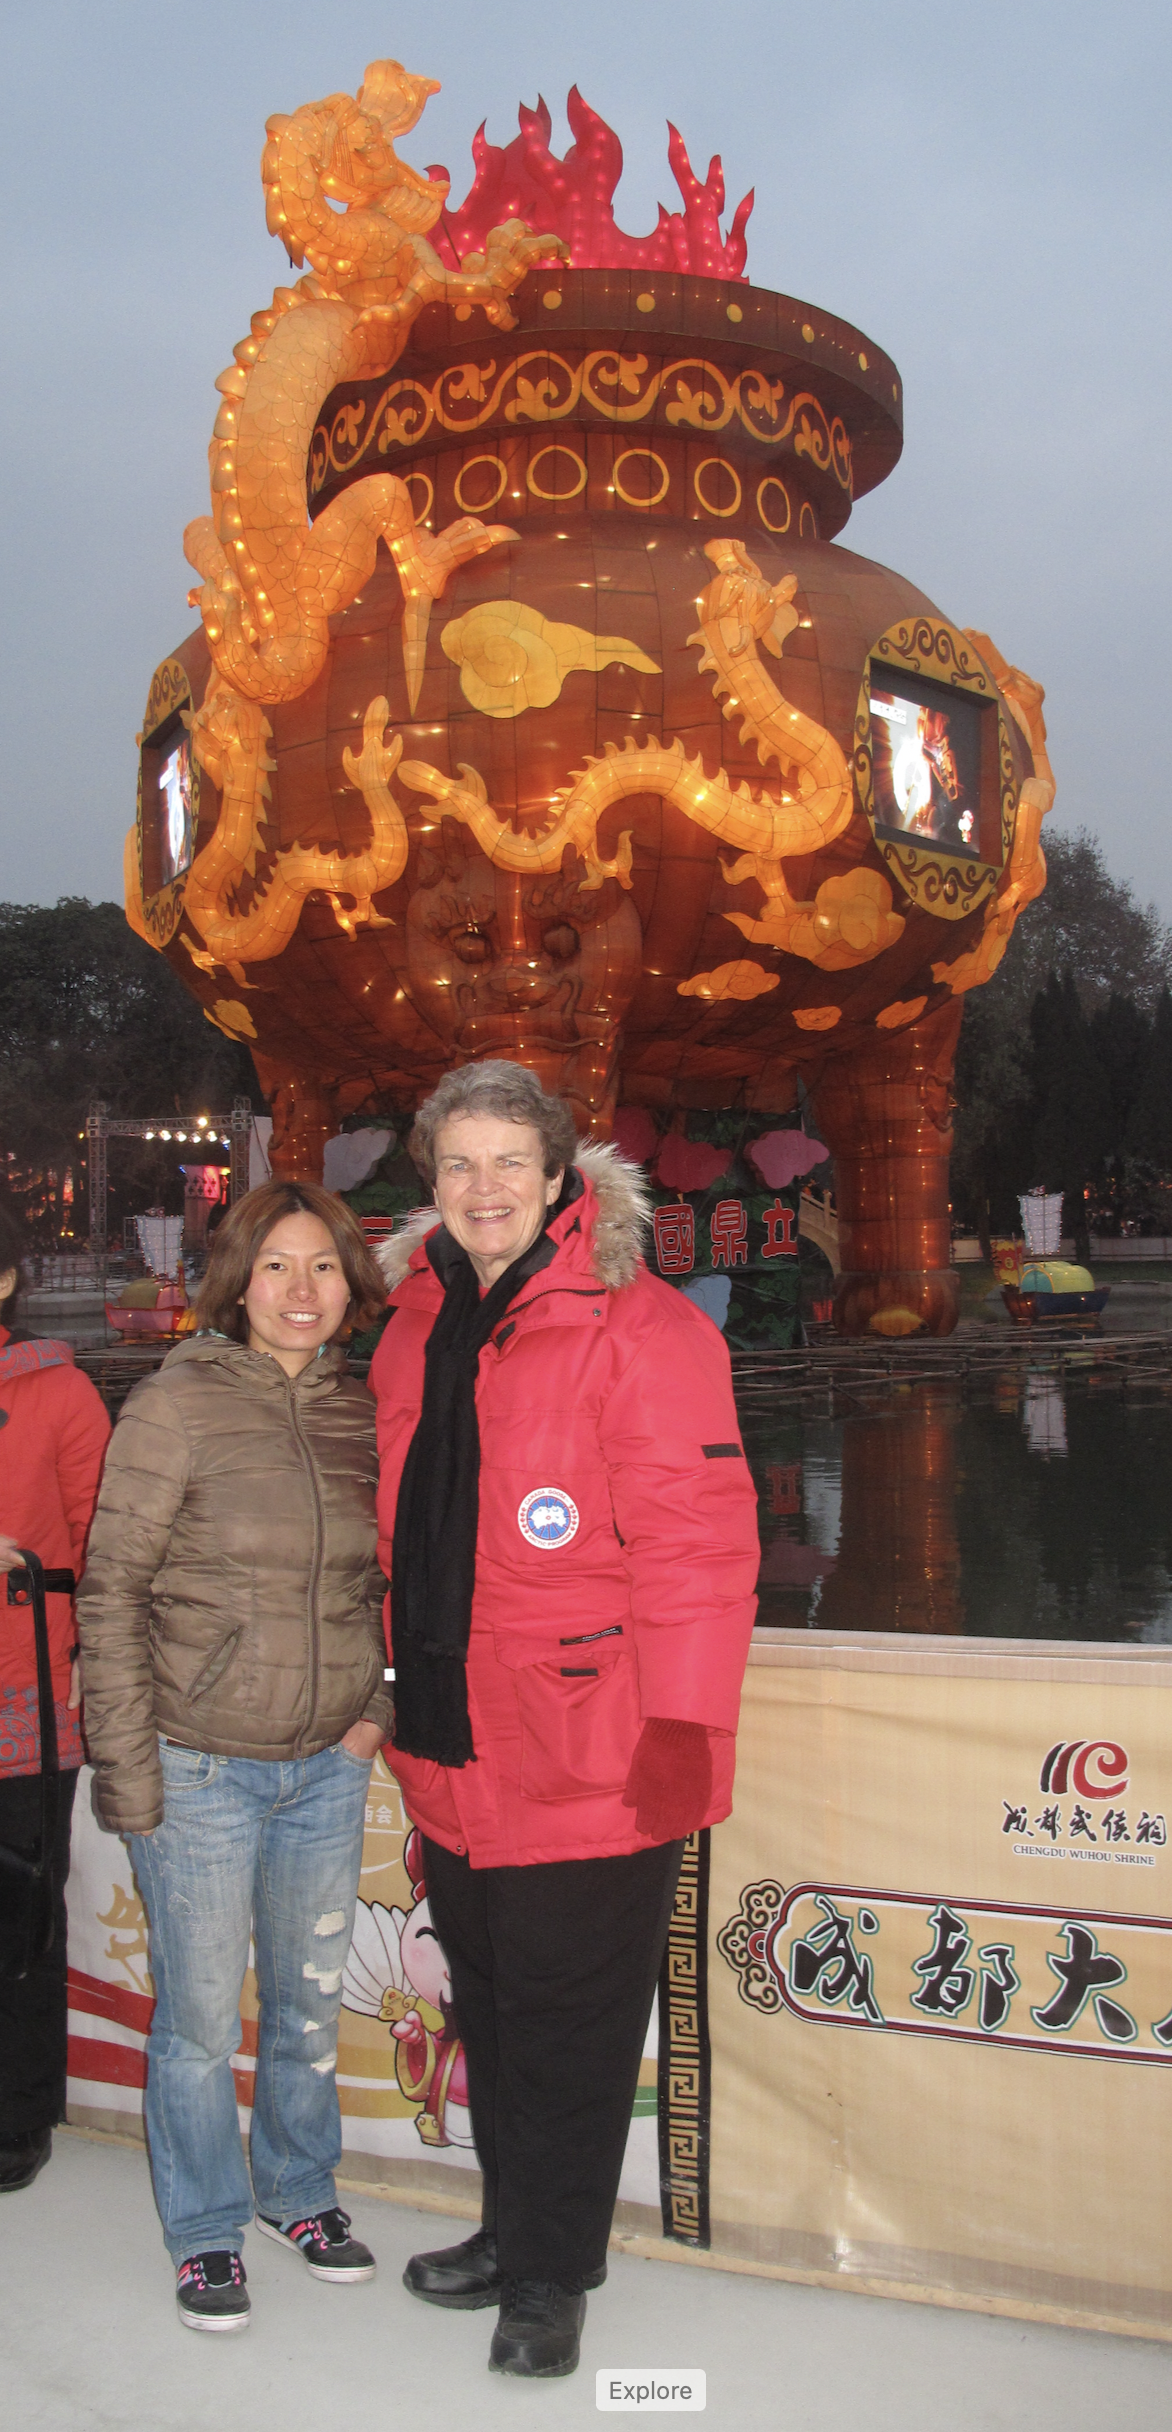 Dian celebrates the New Year in China experiencing all of their family traditions that go along with the holiday.